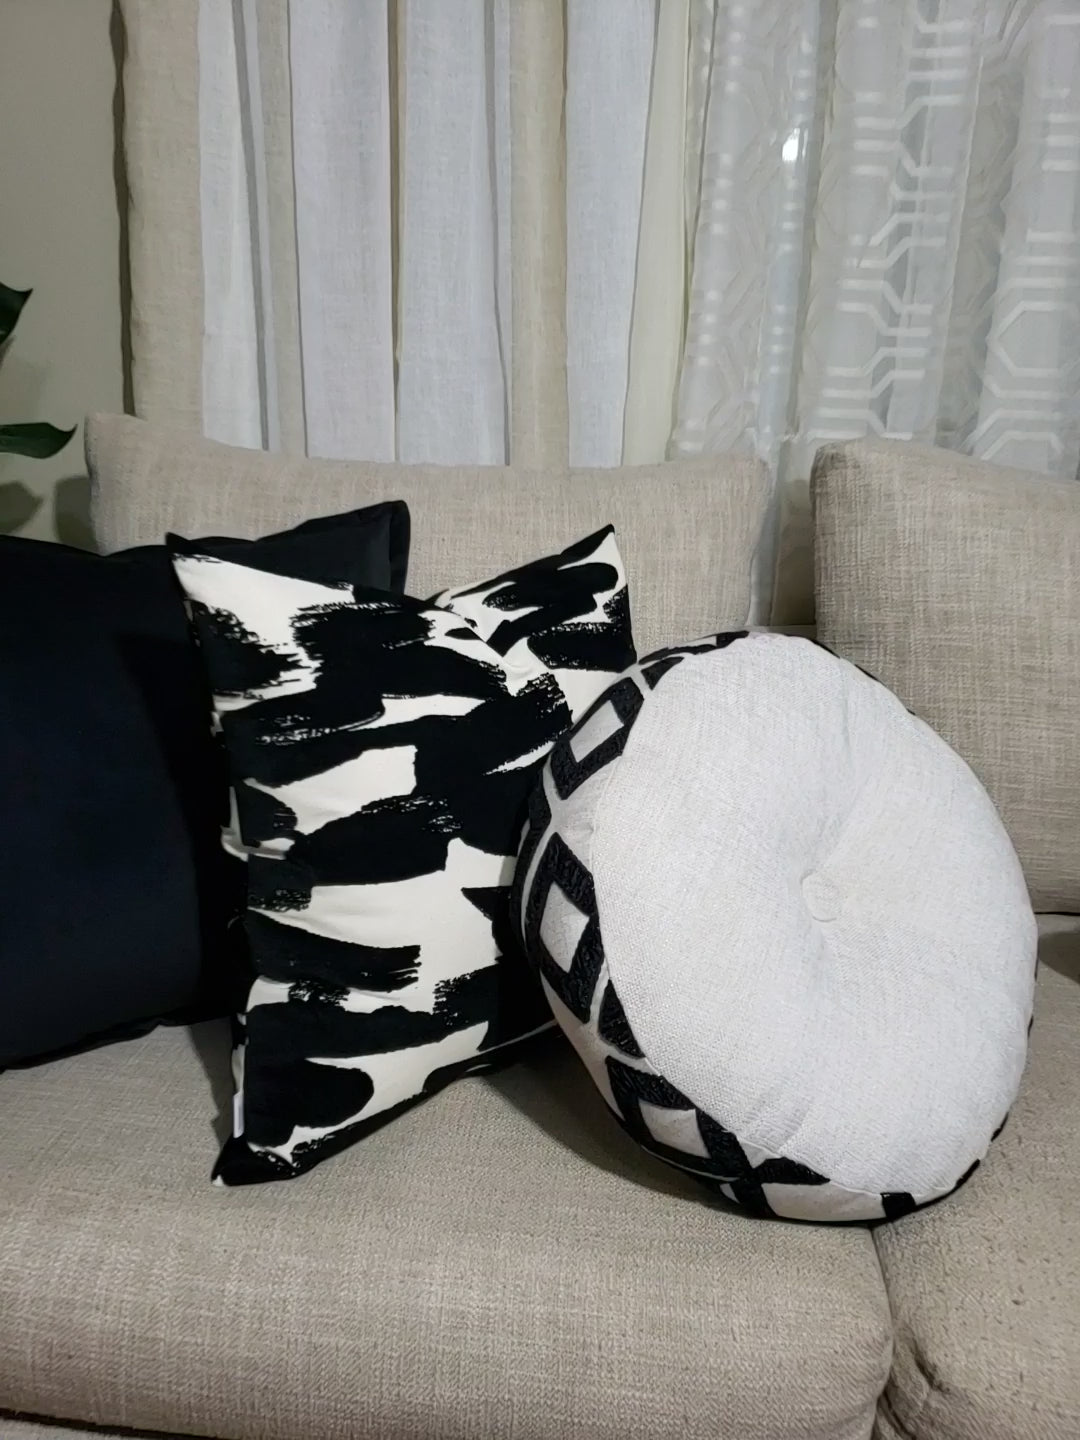 Add a bold and stylish touch to your home decor with this luxurious black pillow cover. Made with high-quality microsuede designer fabric, its flanged edges provide an elegant look while also making it versatile for any room. Make a statement and enhance your living space with this must-have accessory.